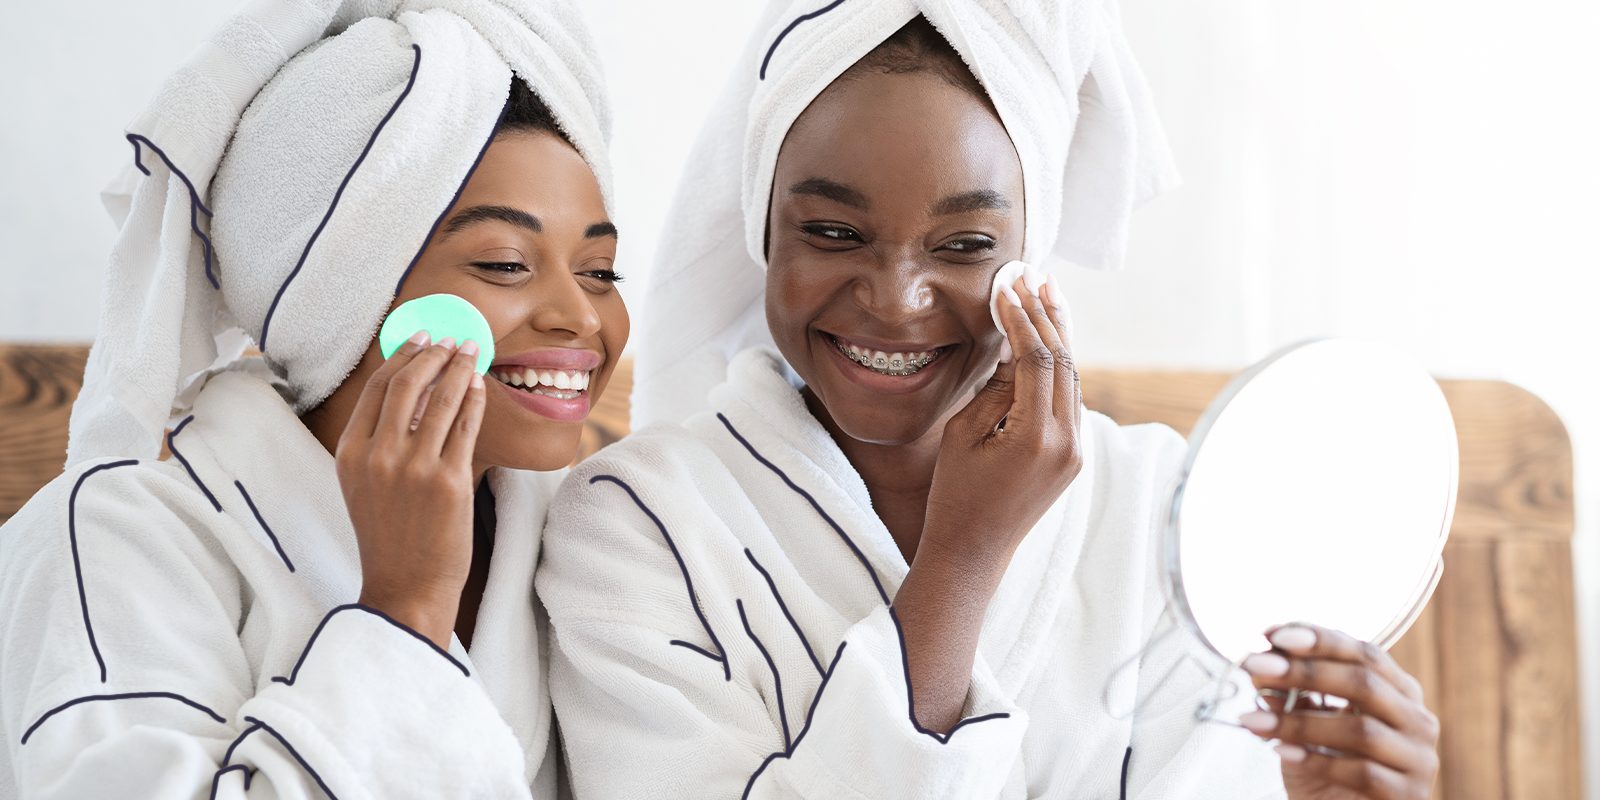 two women using a product and smiling, they are applying makeup